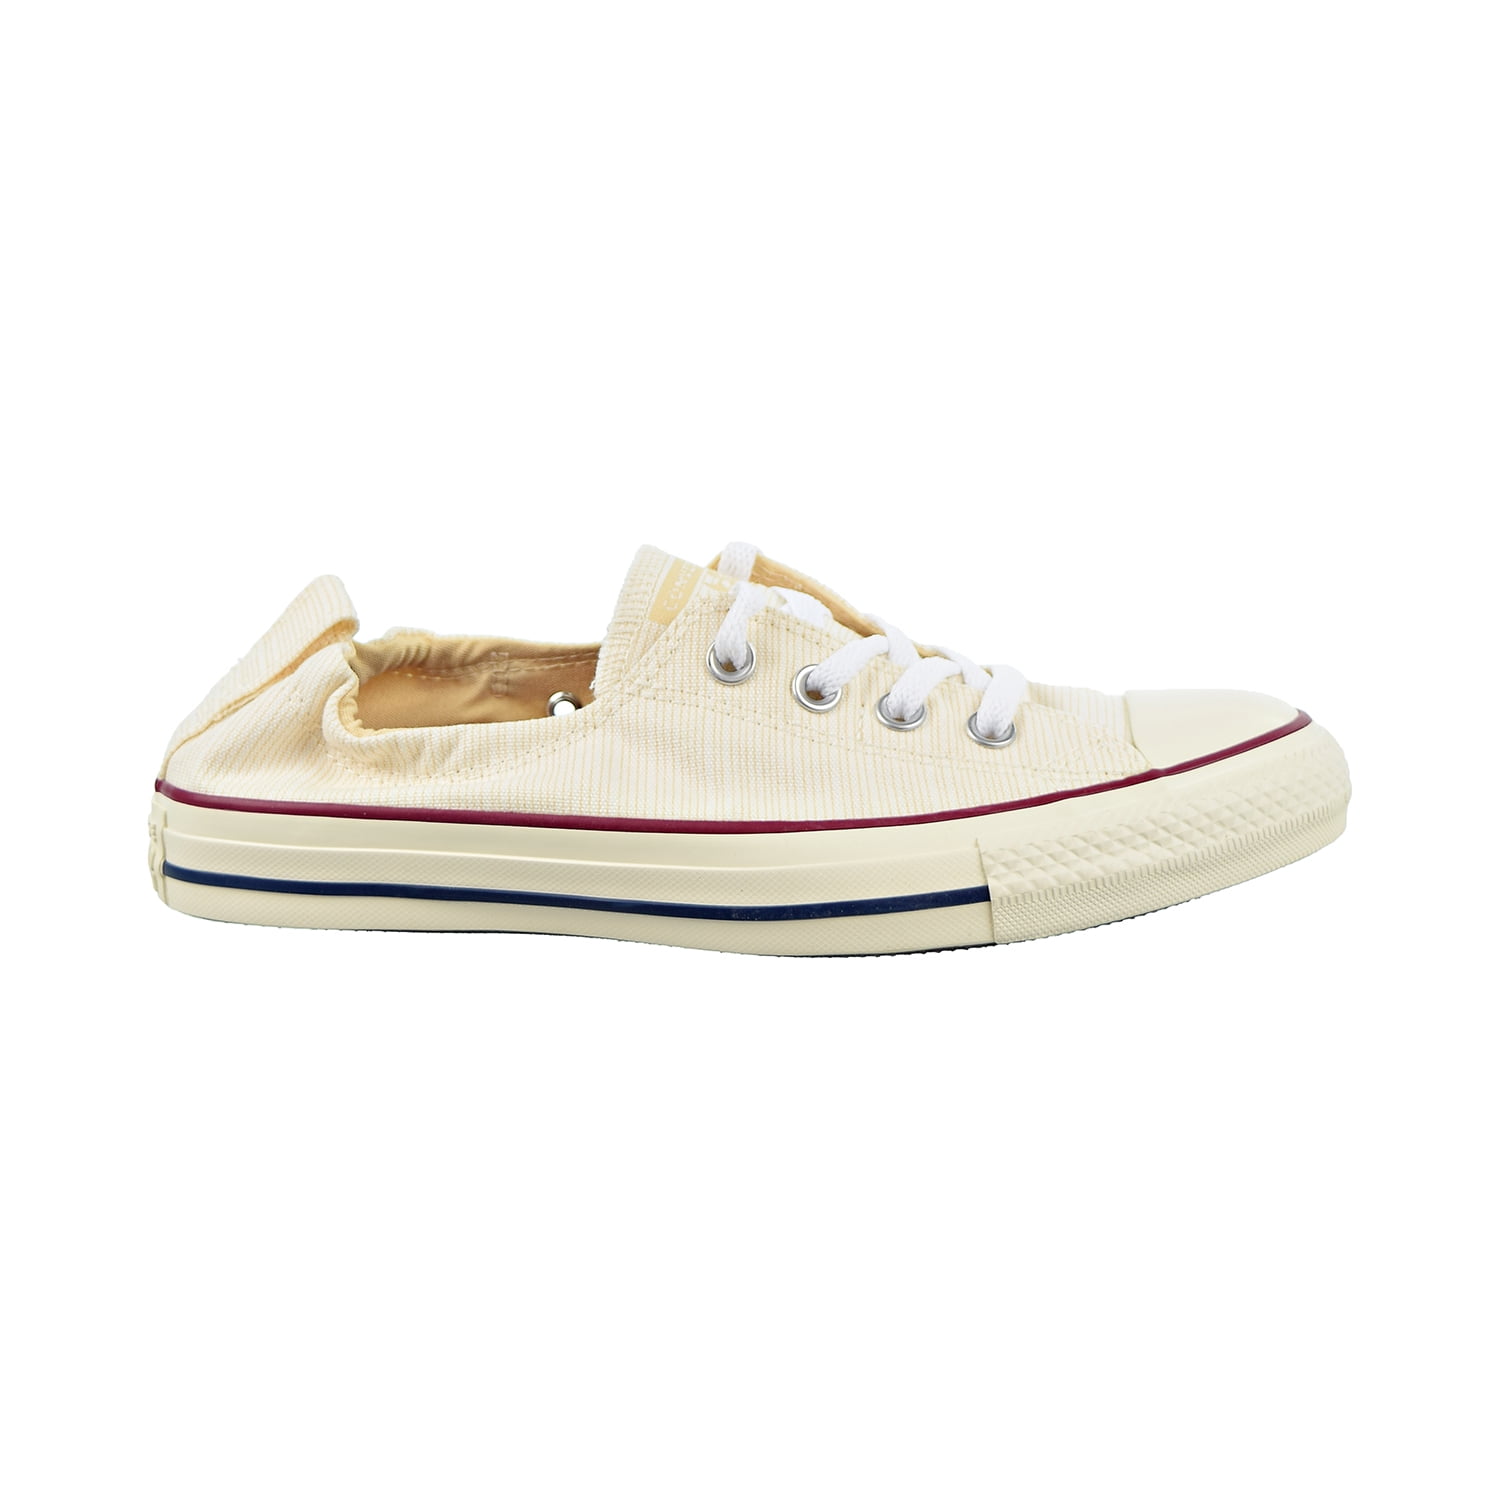 converse all star low leather light twine rose gold exclusive